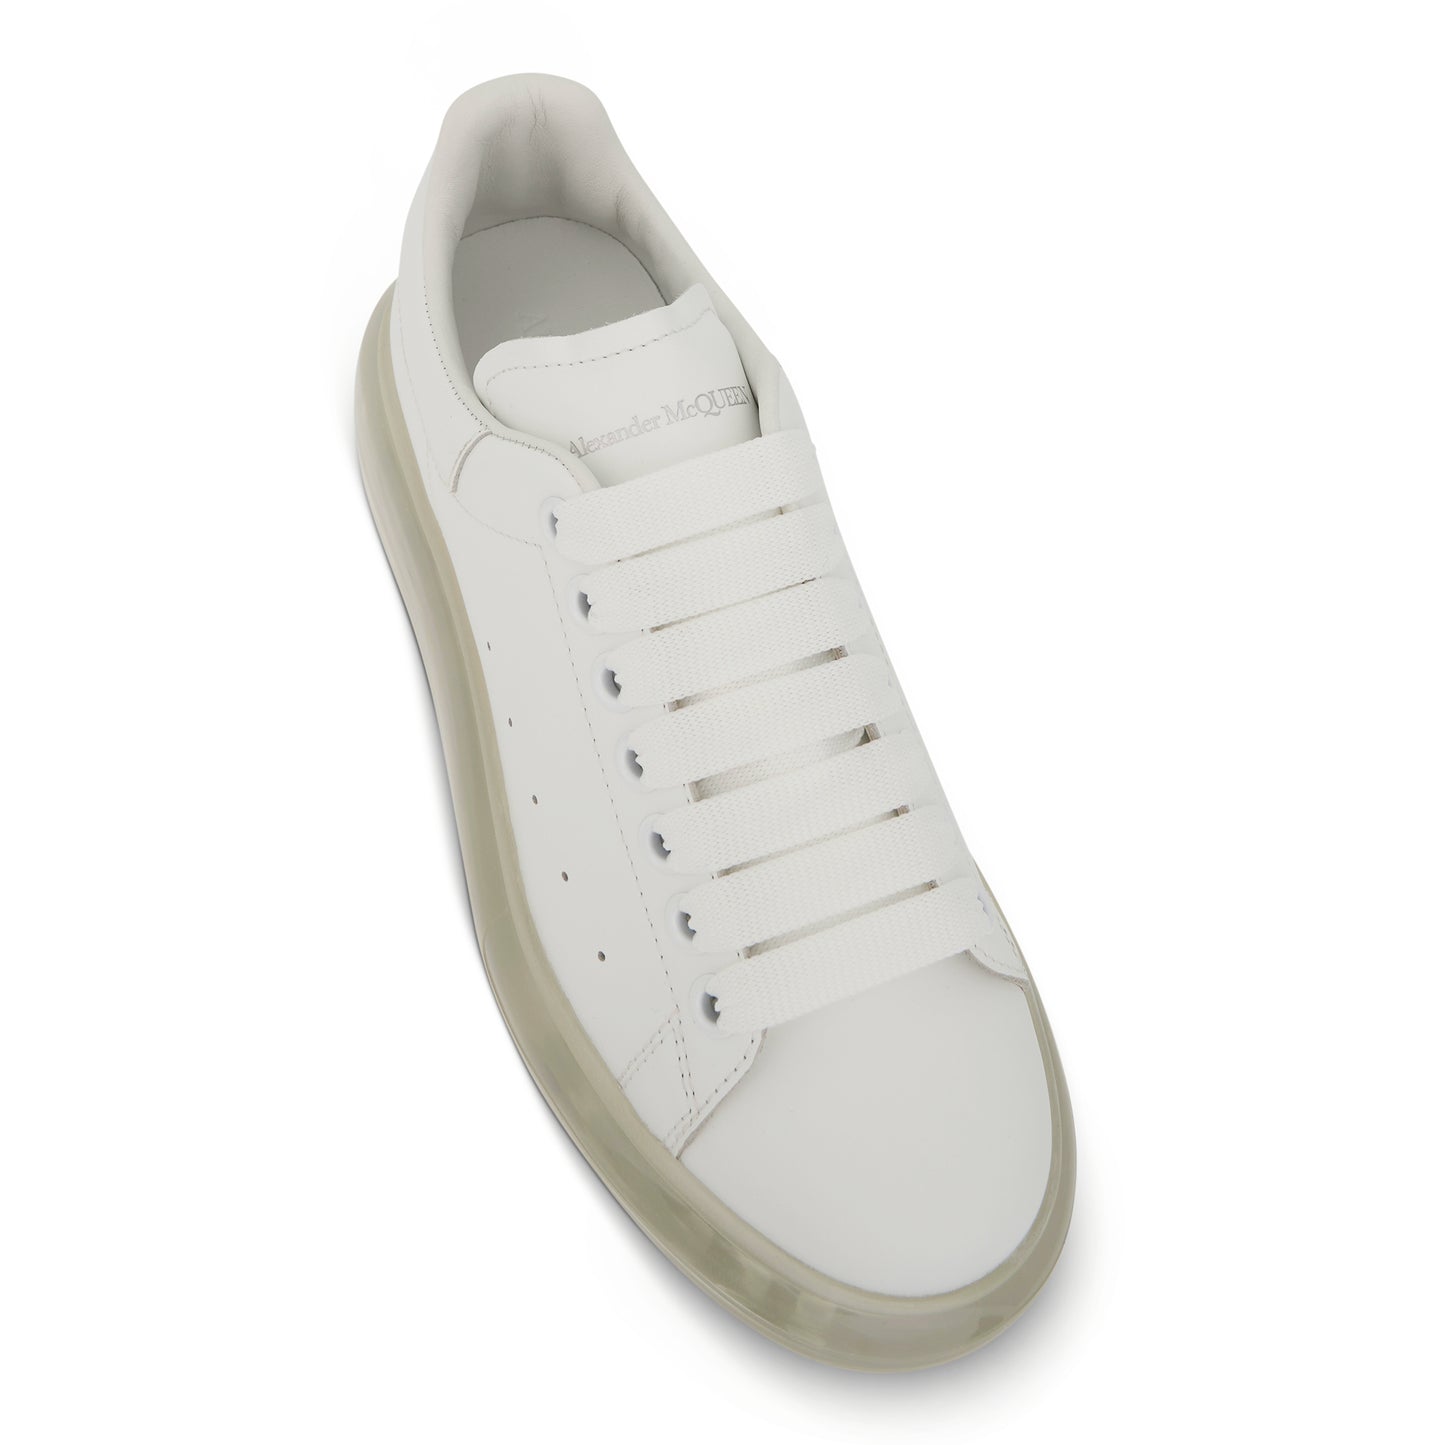 Larry Transparent Sole Sneakers in White/White